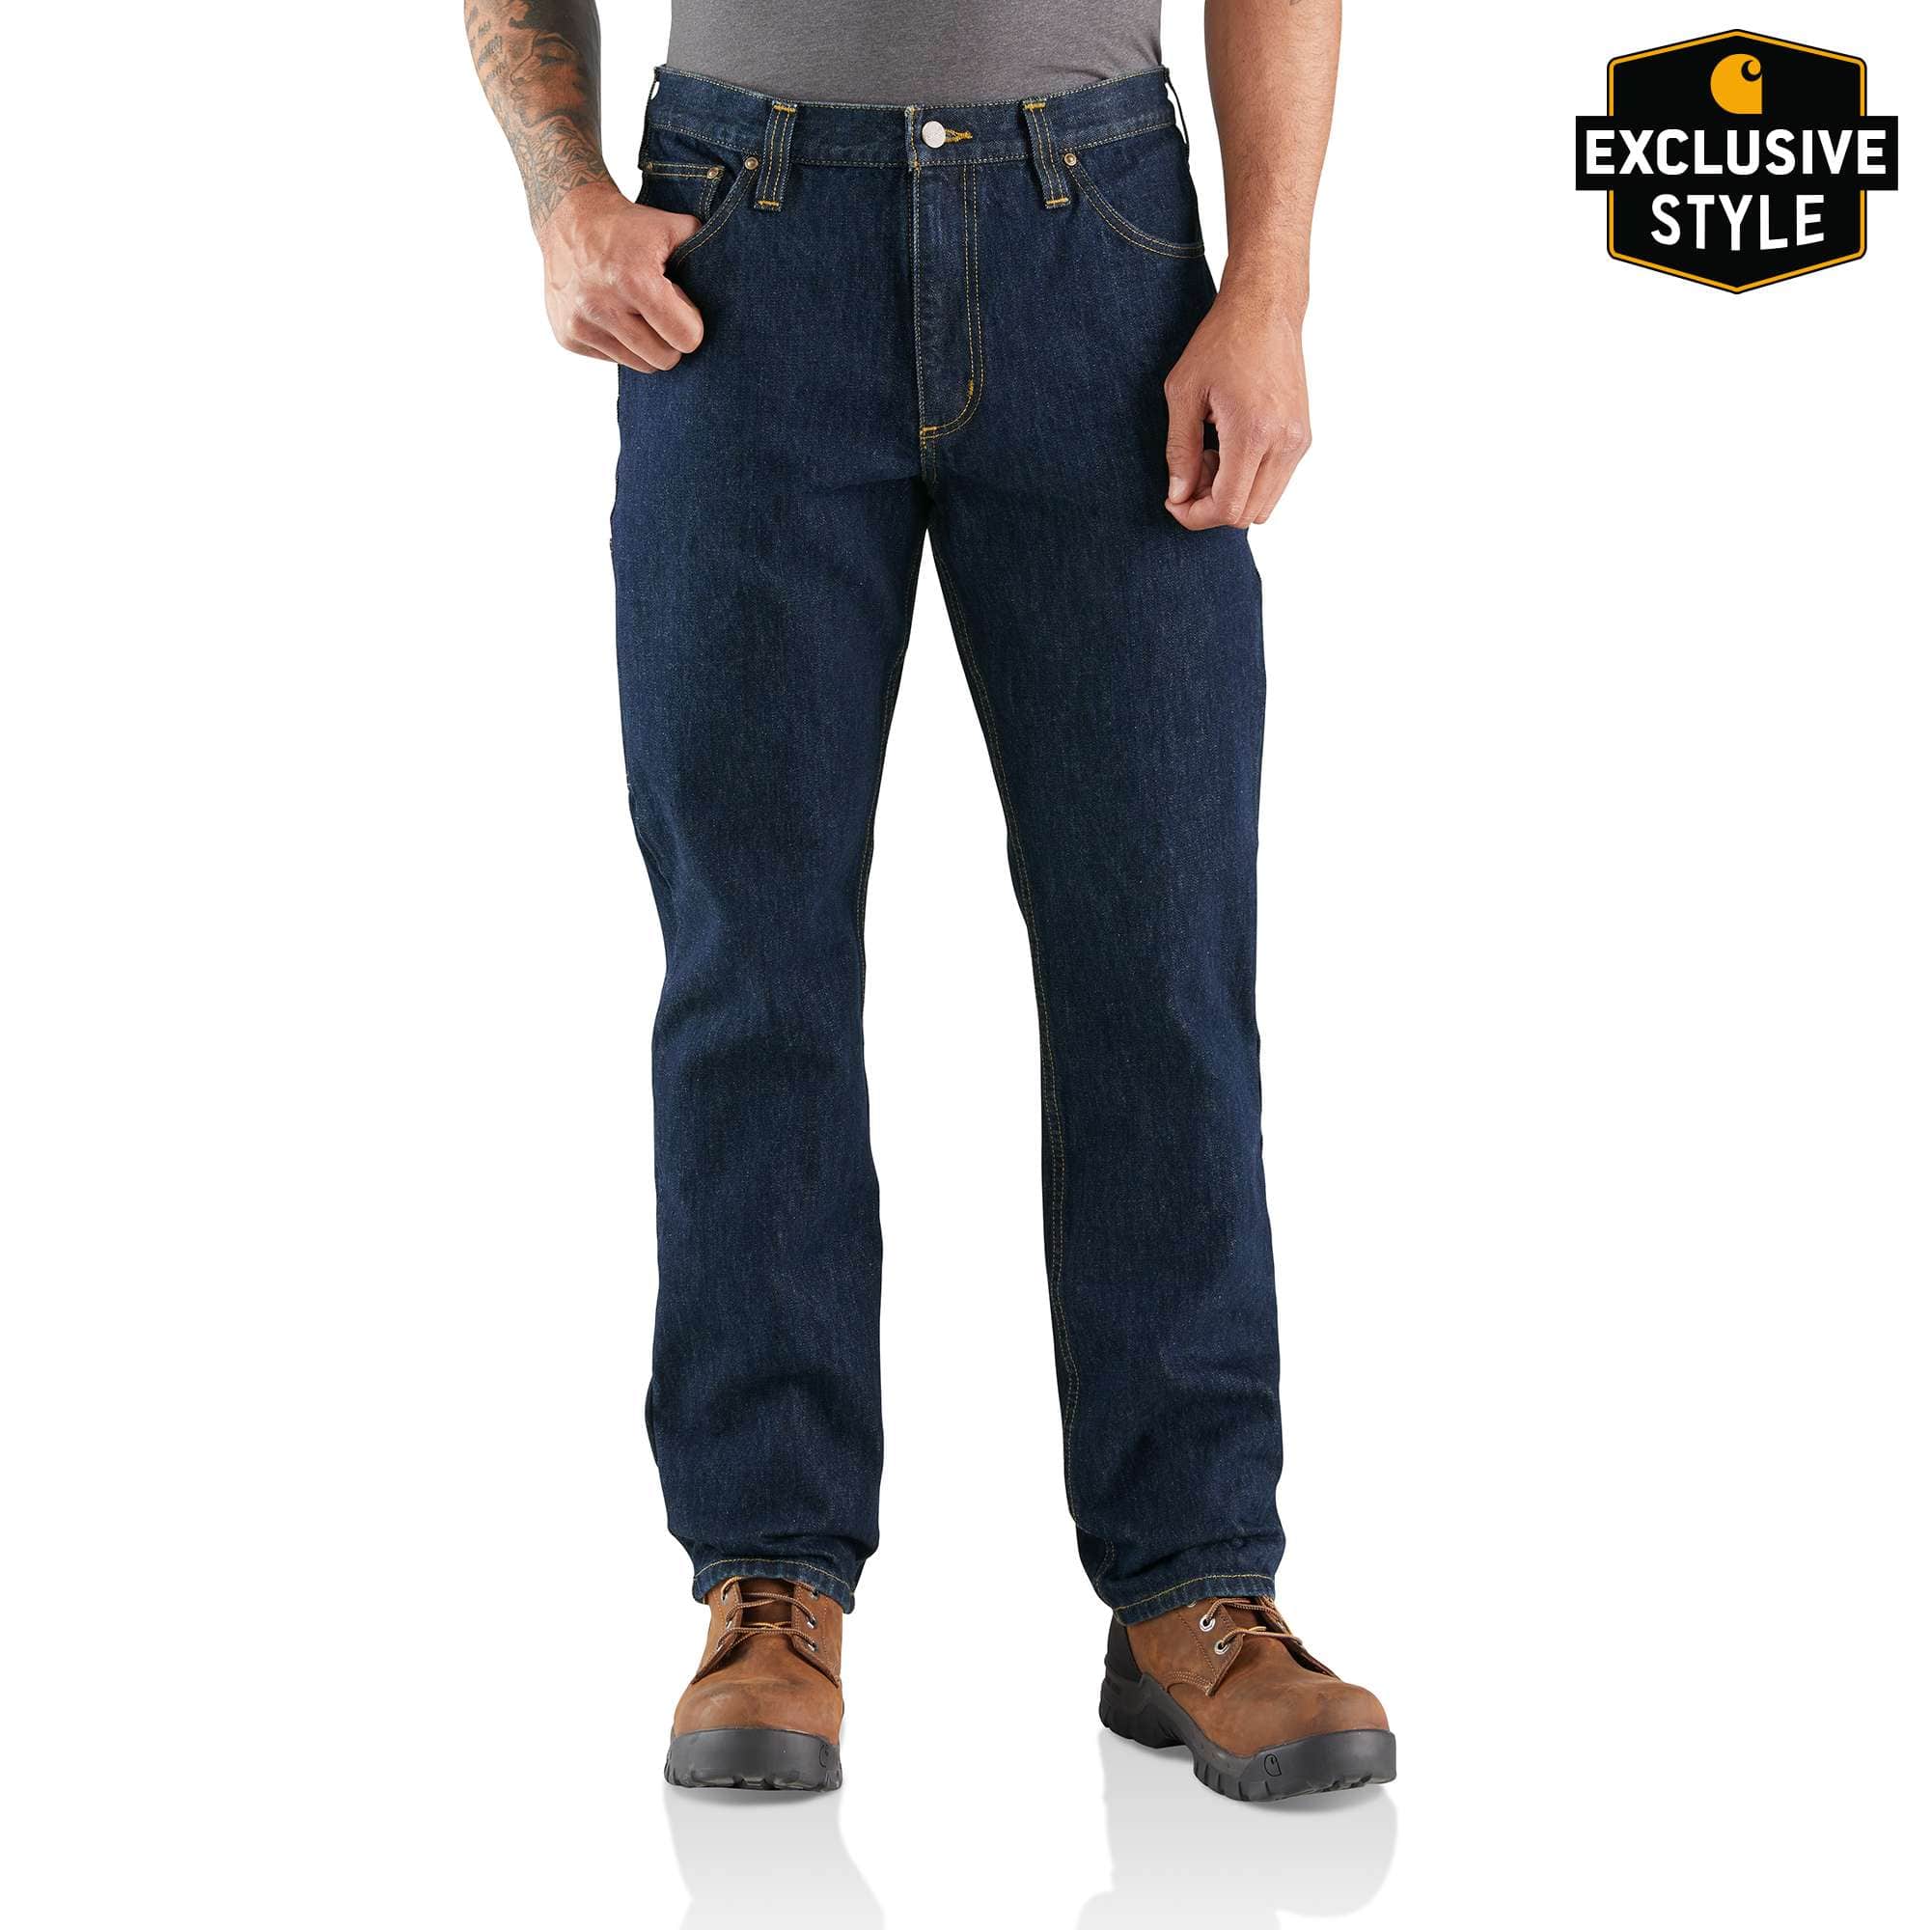 carhartt jeans with cell phone pocket